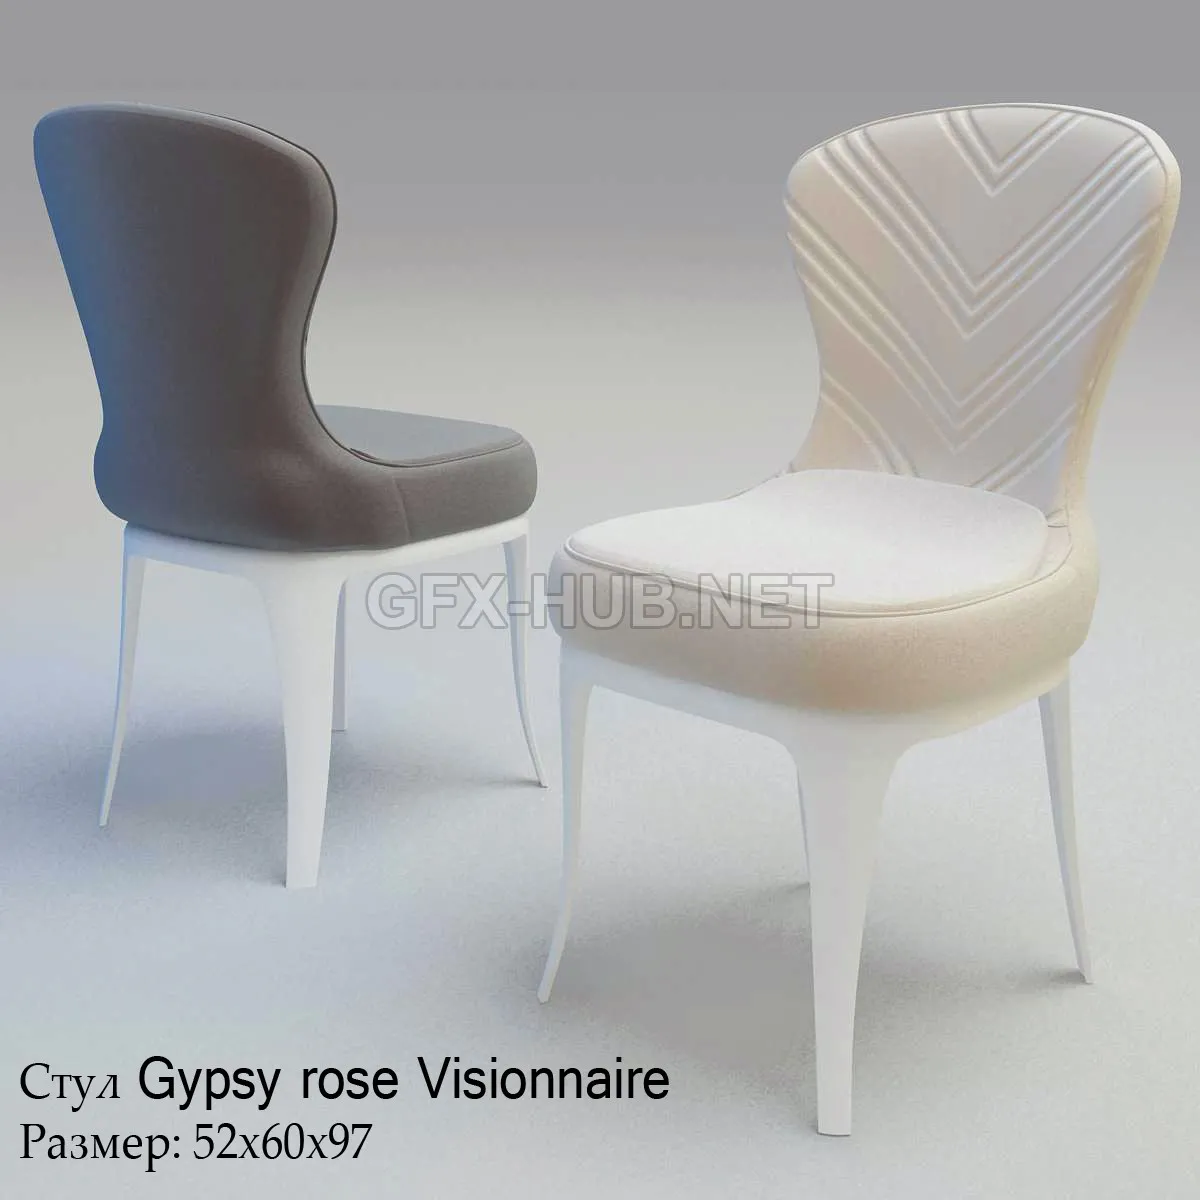 FURNITURE 3D MODELS – Chair Gypsy Rose Ipe Cavalli Visionnaire